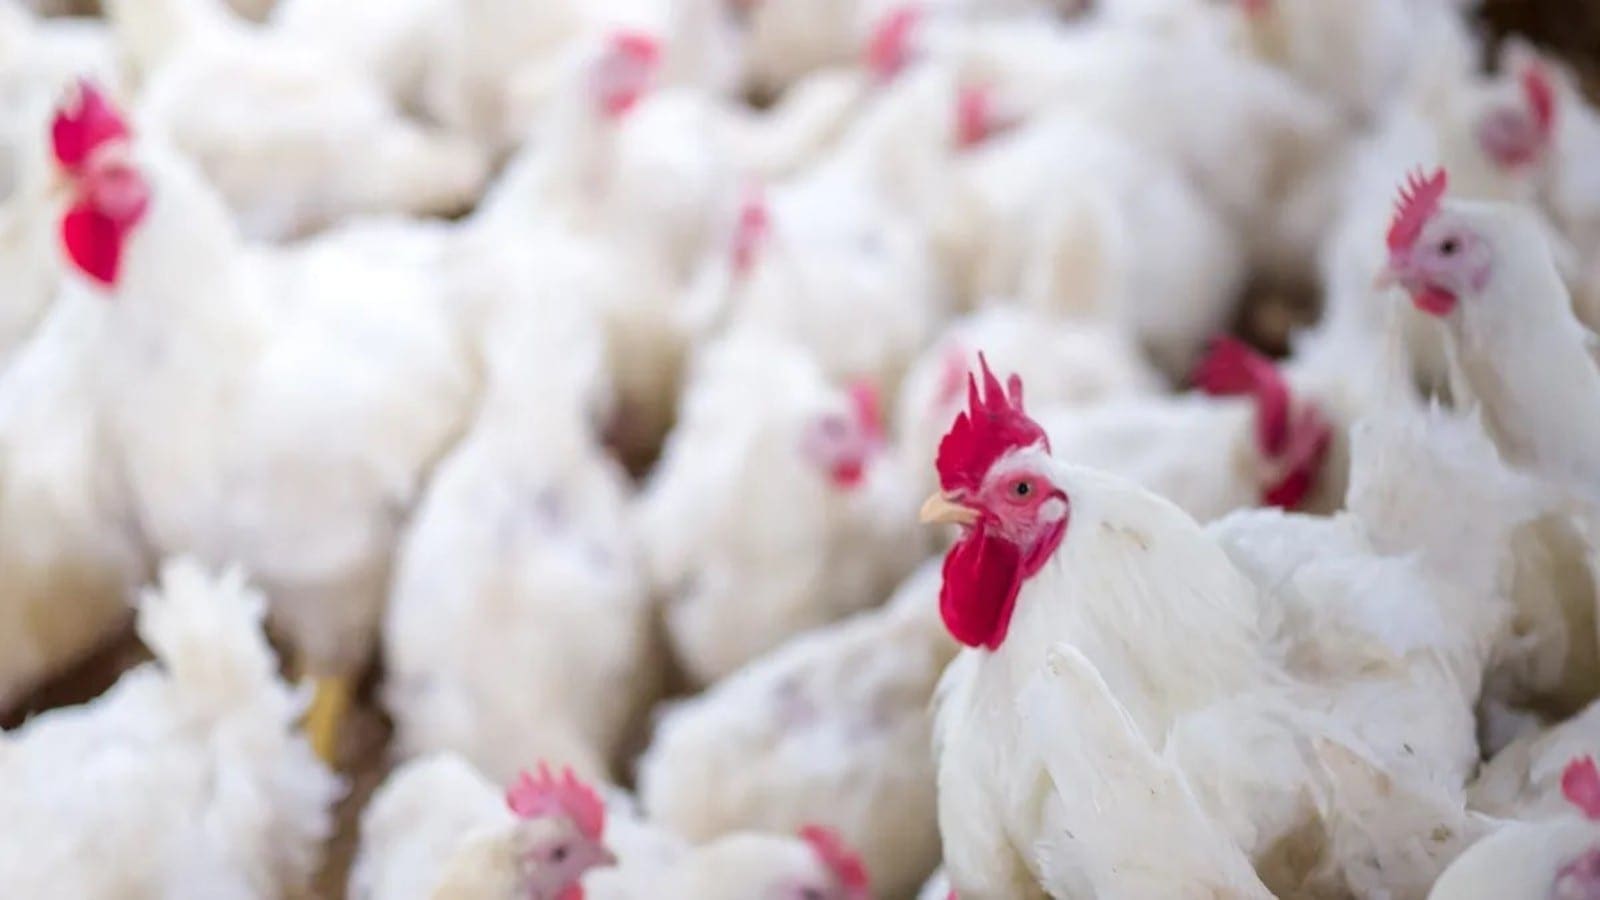 Central Bank of Nigeria supports poultry industry with US$33m